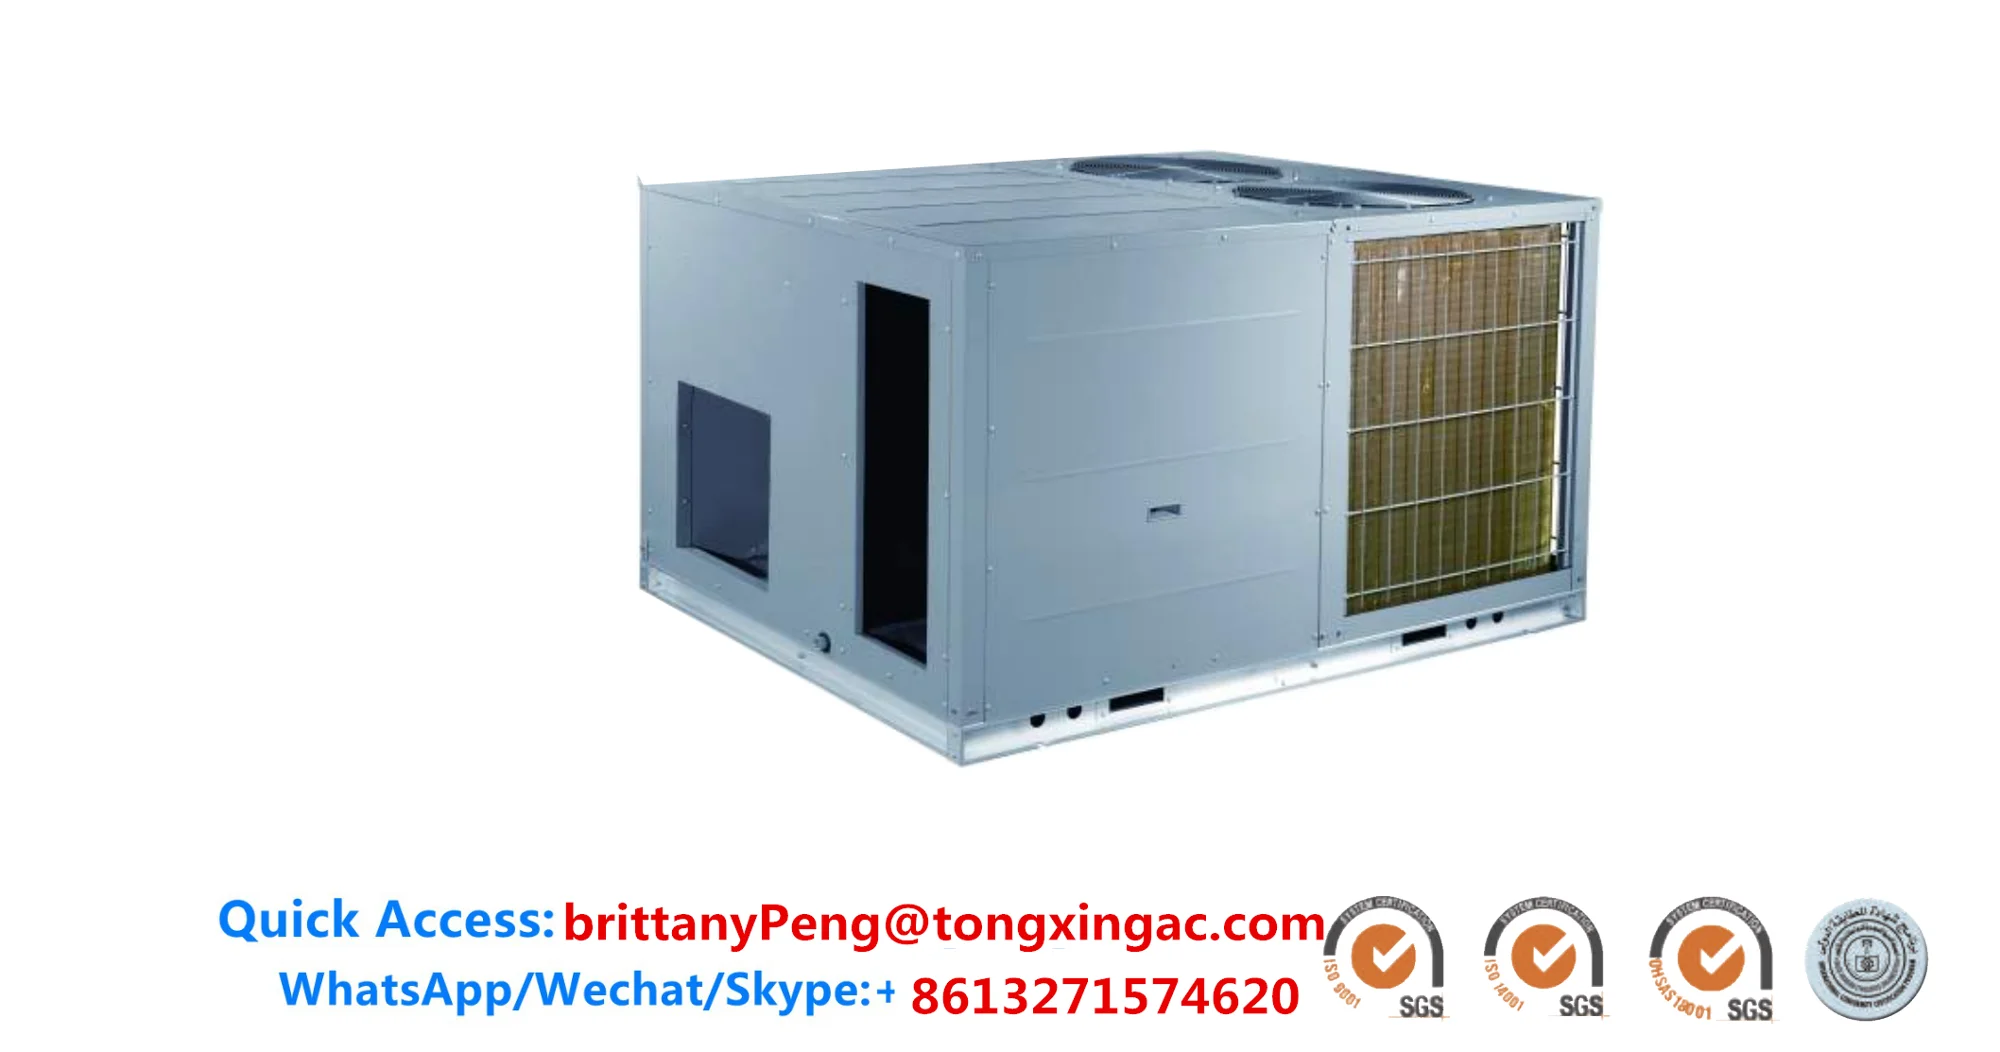 5 Ton Rooftop Gree Air Conditioner Package Unit With Heat Pump Household And Light Commercial Air Conditioner Buy Rooftop Gree Air Conditioner Package Unit With Heat Pump Household And Light Commercial Air